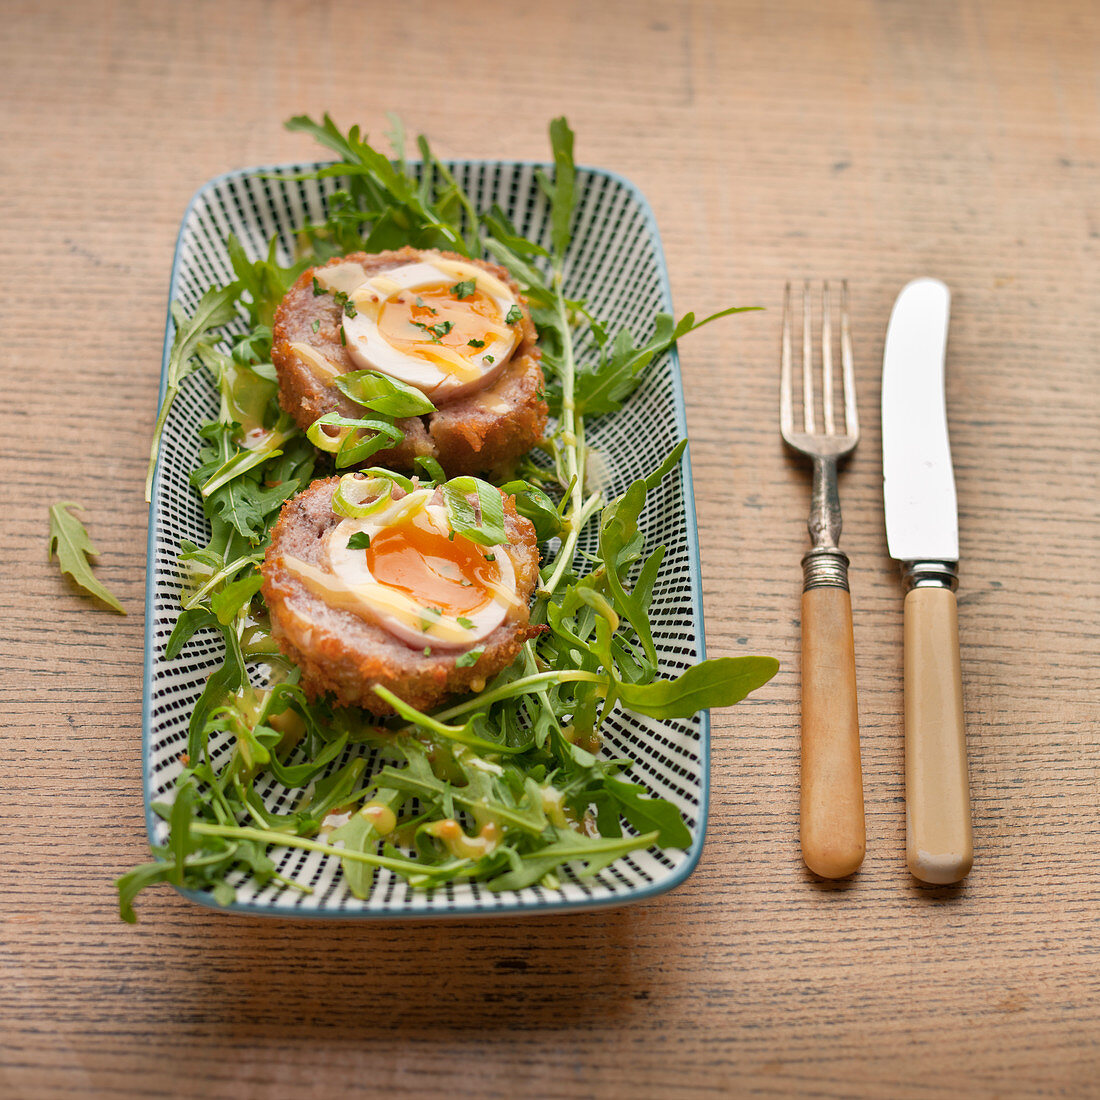 Two Scotch eggs with runny yokes on rocket salad